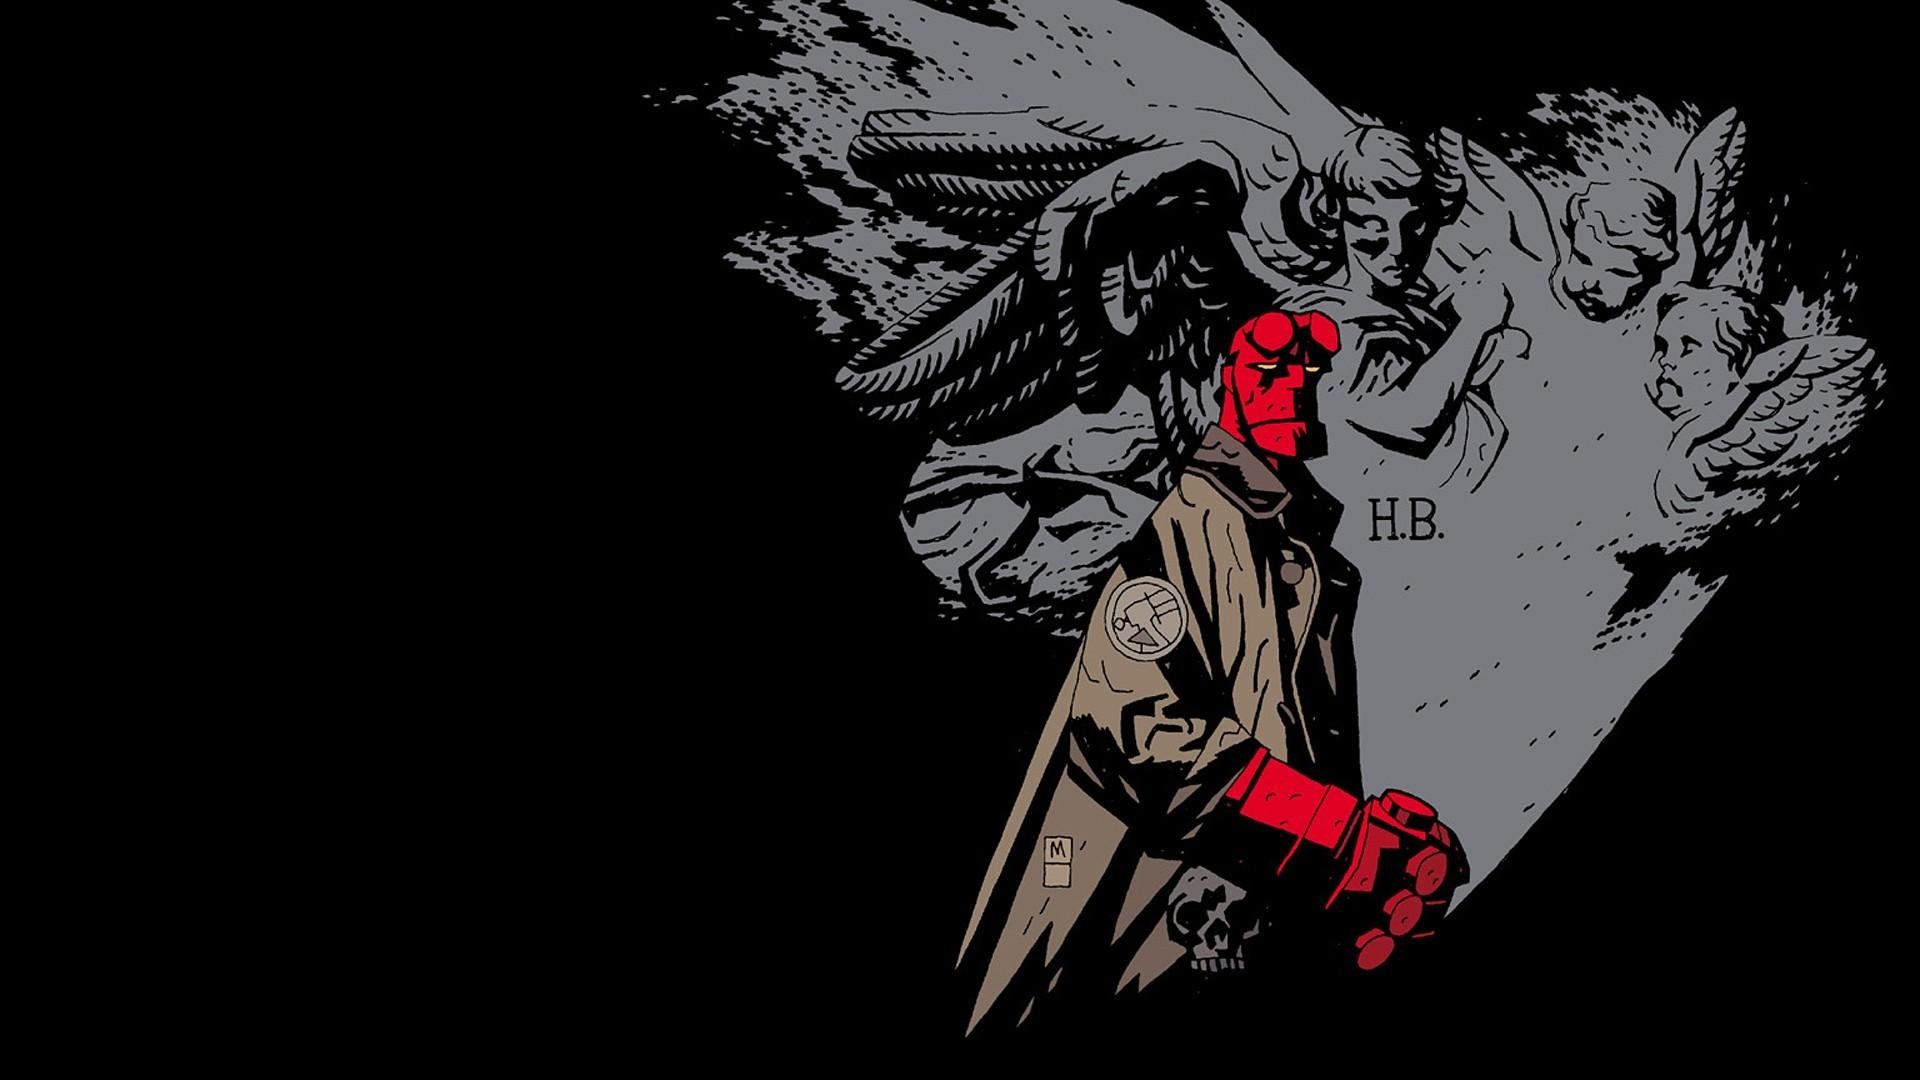 1920x1080 Hellboy Wallpapers - Wallpaper Cave | Adorable Wallpapers | Pinterest |  Wallpaper and Logos